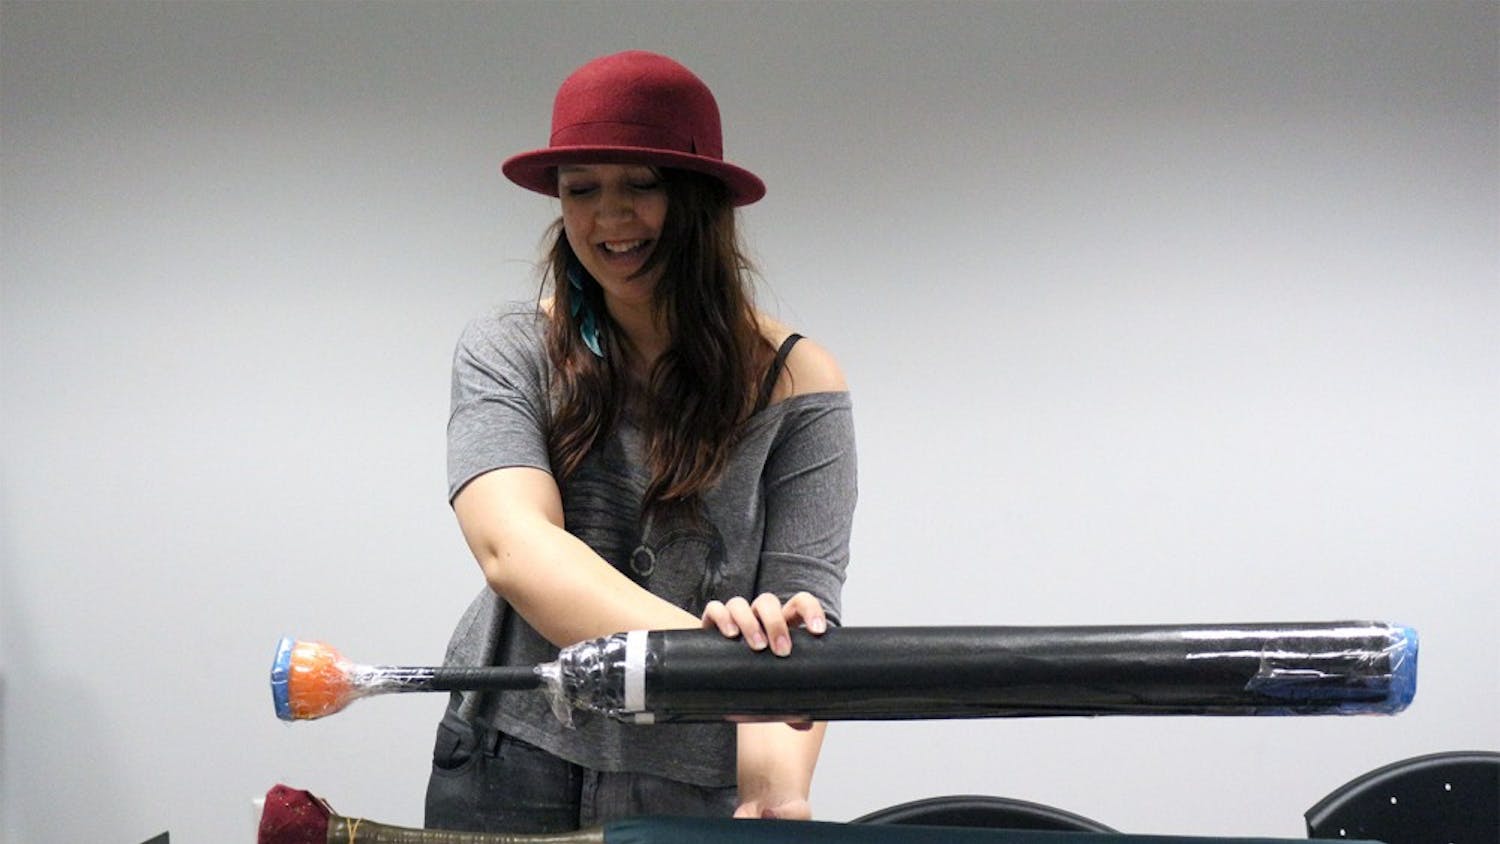 Alex Ruba holds up two different versions of a short sword, a type of weaponry used in game play. The top one is in the process of being made and shows the inner parts of the sword including the golf shaft center, the foam body, and the cut pool noodle at the top. The bottom sword is completed with a fabric covering. 